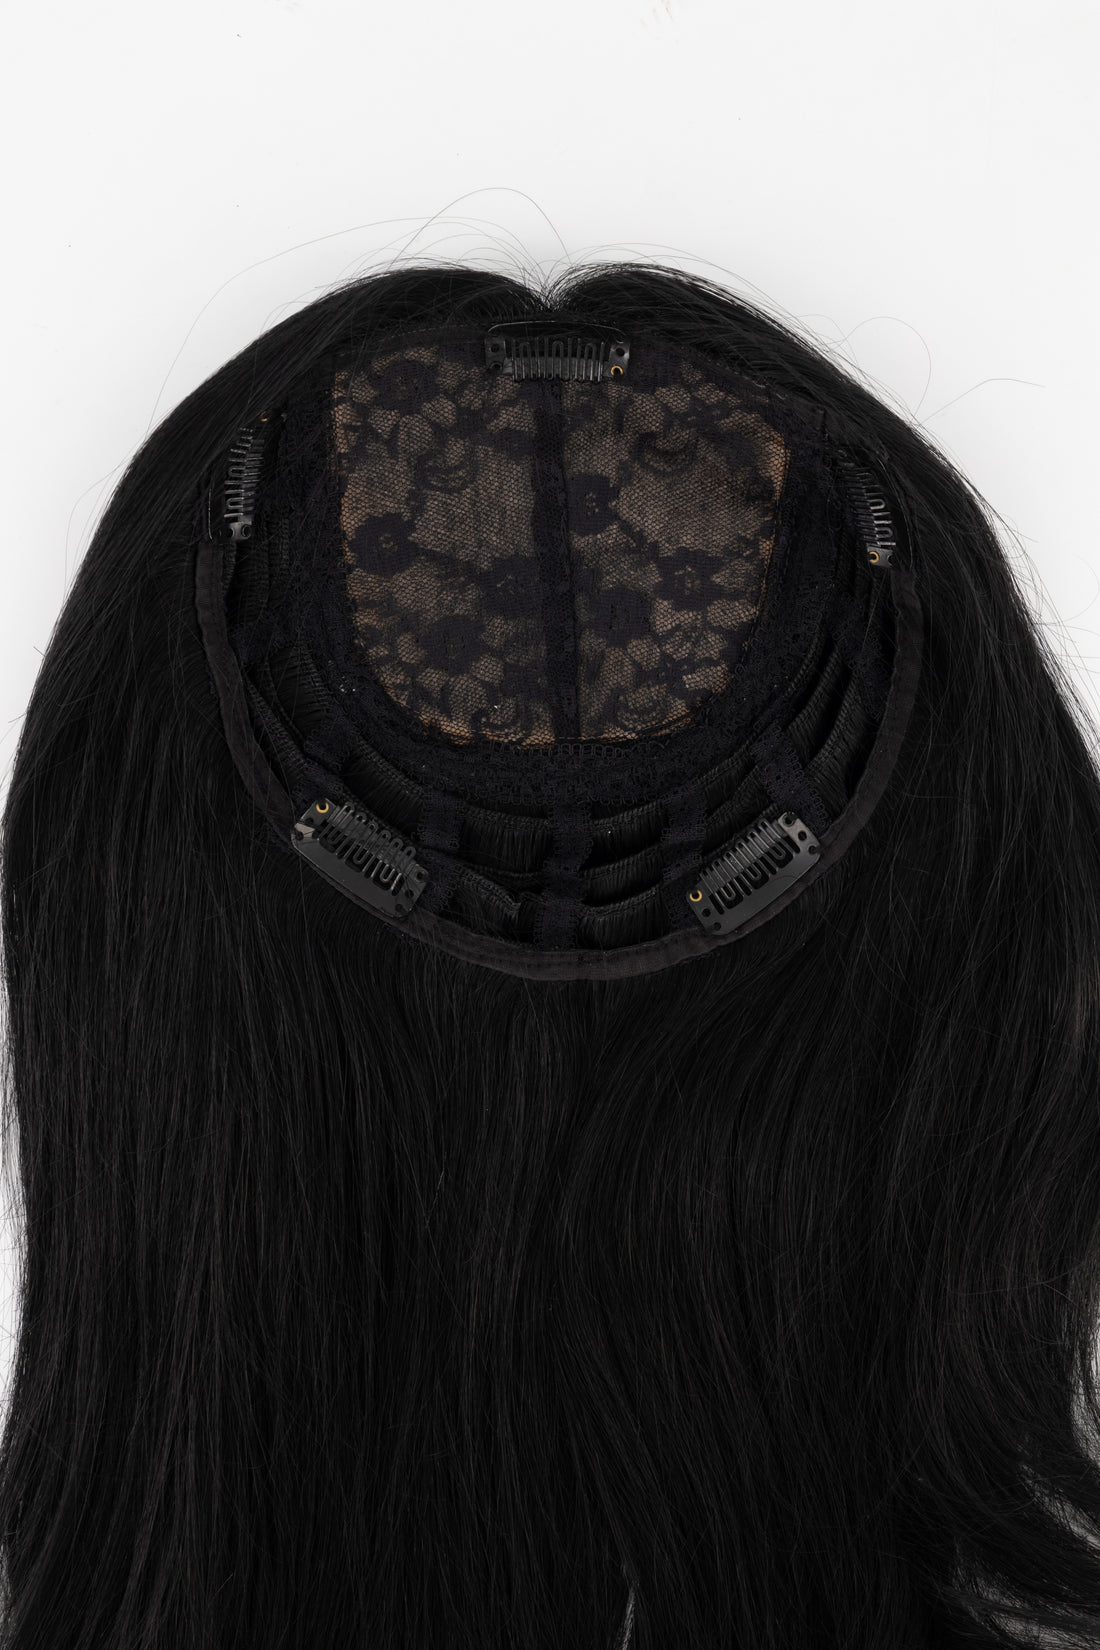 Frotnrow crown topper hair extensions in jet black